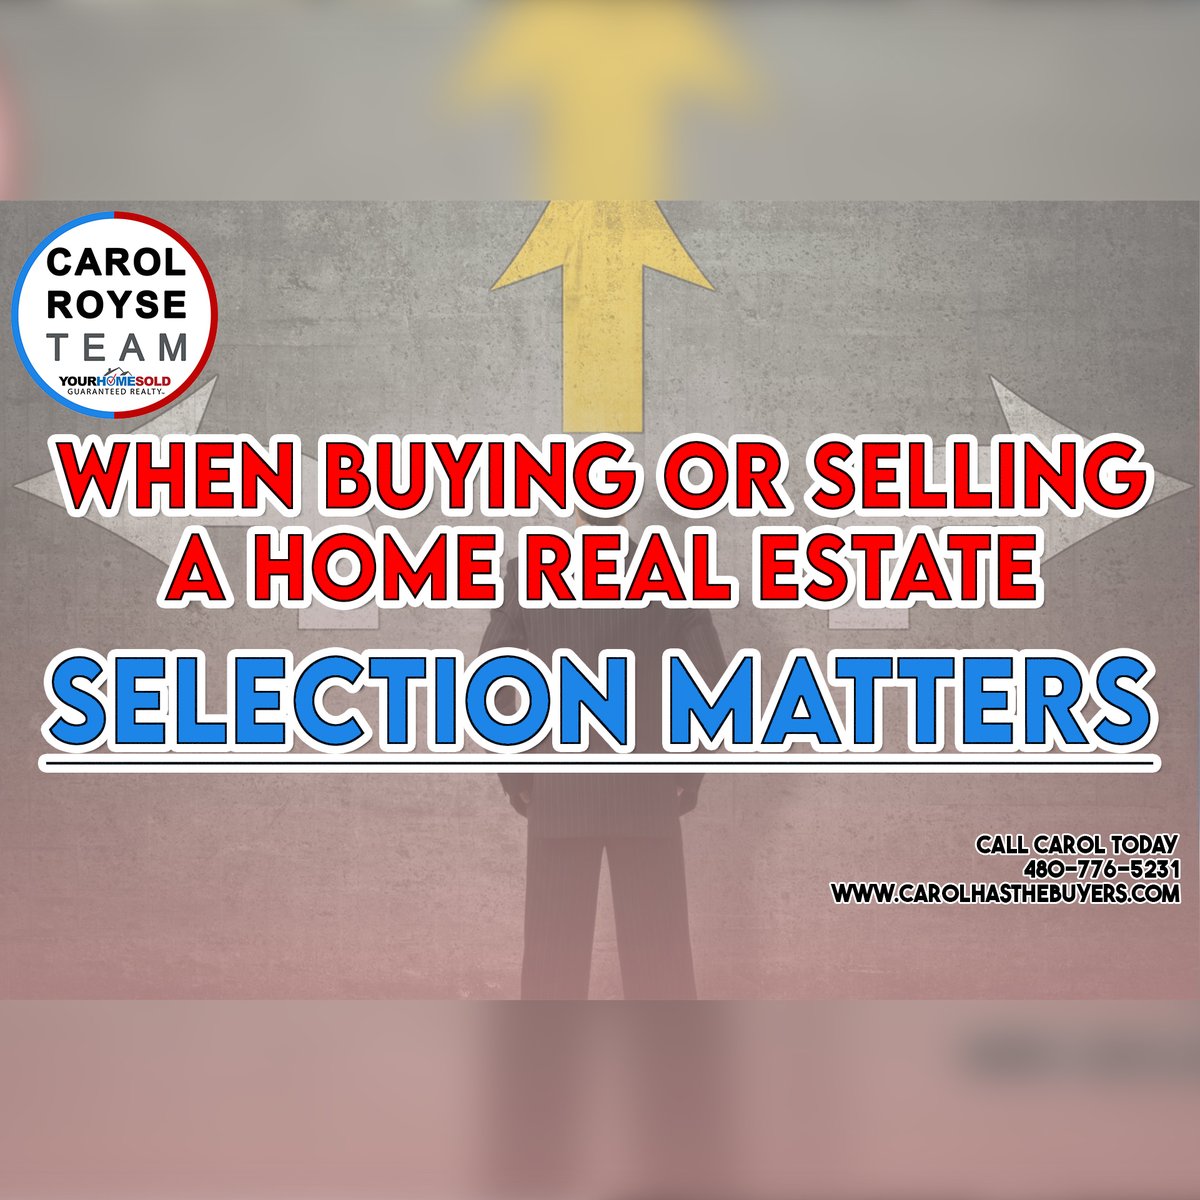 When Buying or Selling a Home Real Estate Selection Matters!

Read more: carolroyseteam.com/real-estate-se…

#carolroyseteam #carolroyse #carolhasthebuyers #homeselling #homebuying #realestatetips #azrealestate #yourhomesold #yourhomesoldguaranteed #yourhomesoldrealty